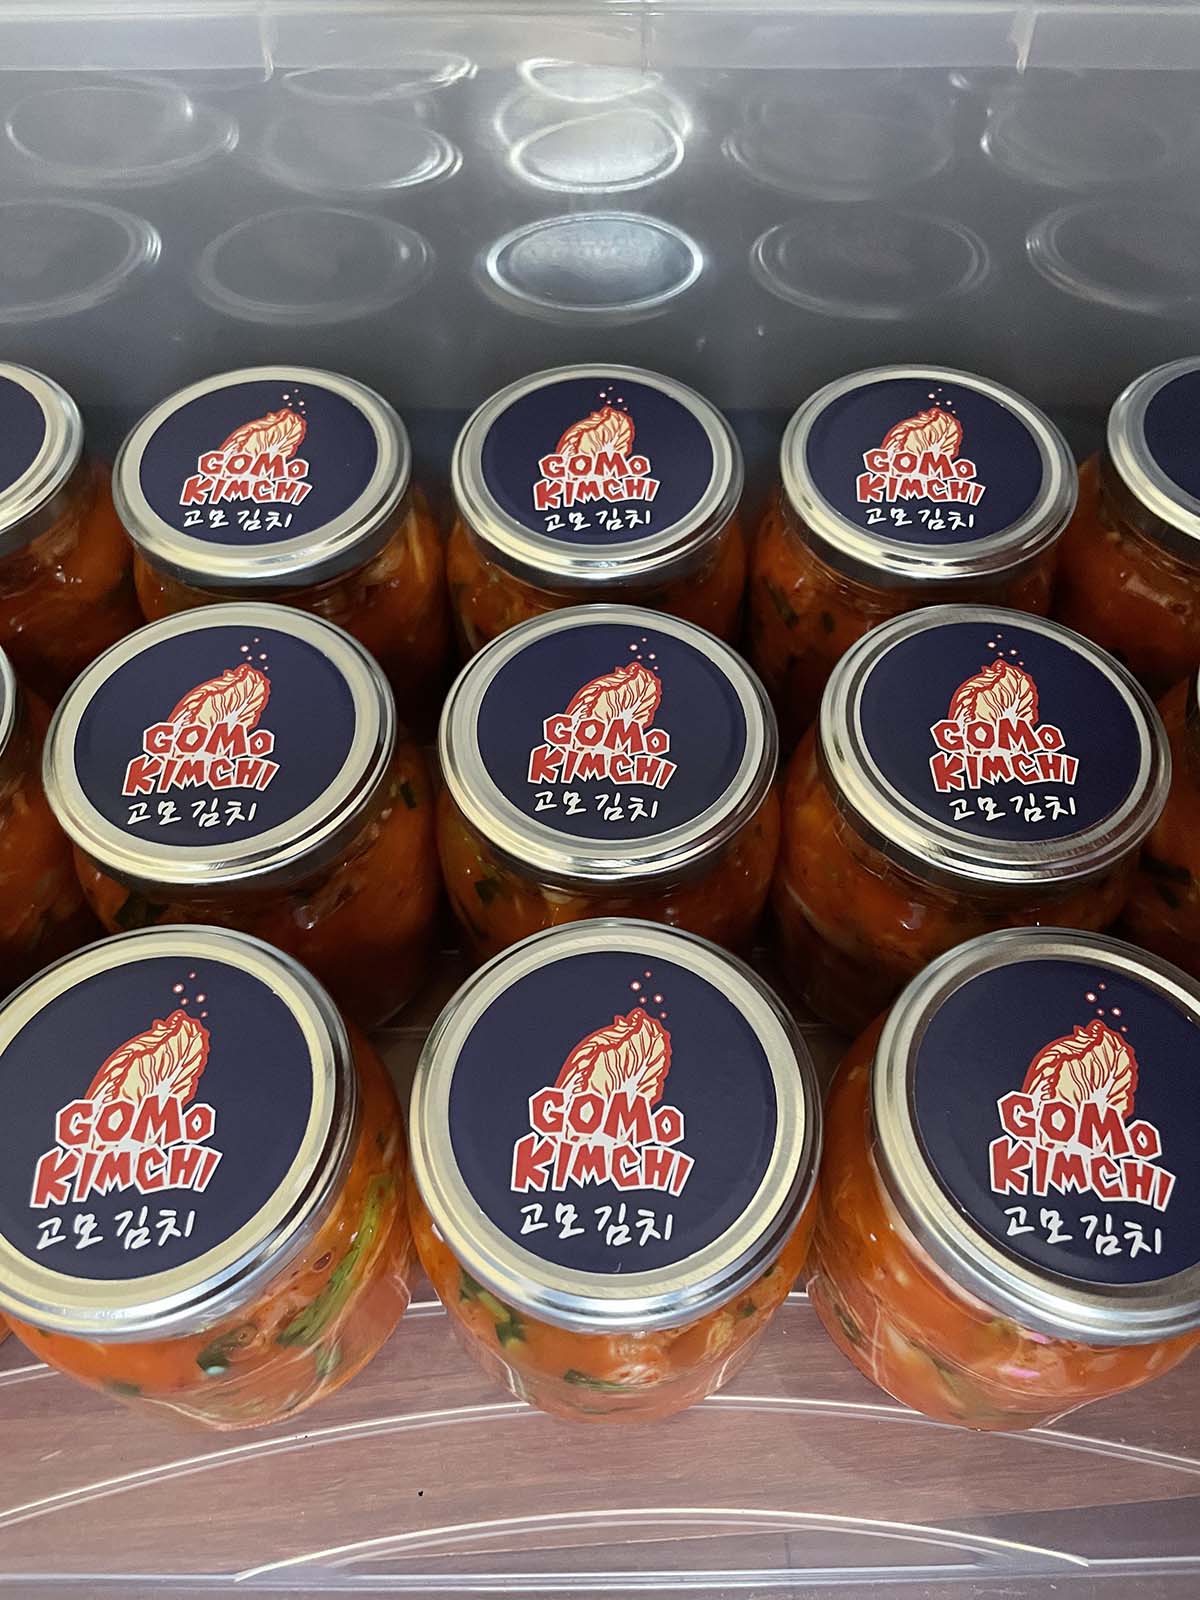 Jars of kimchi with 'Gomo Kimchi' labels on the lids